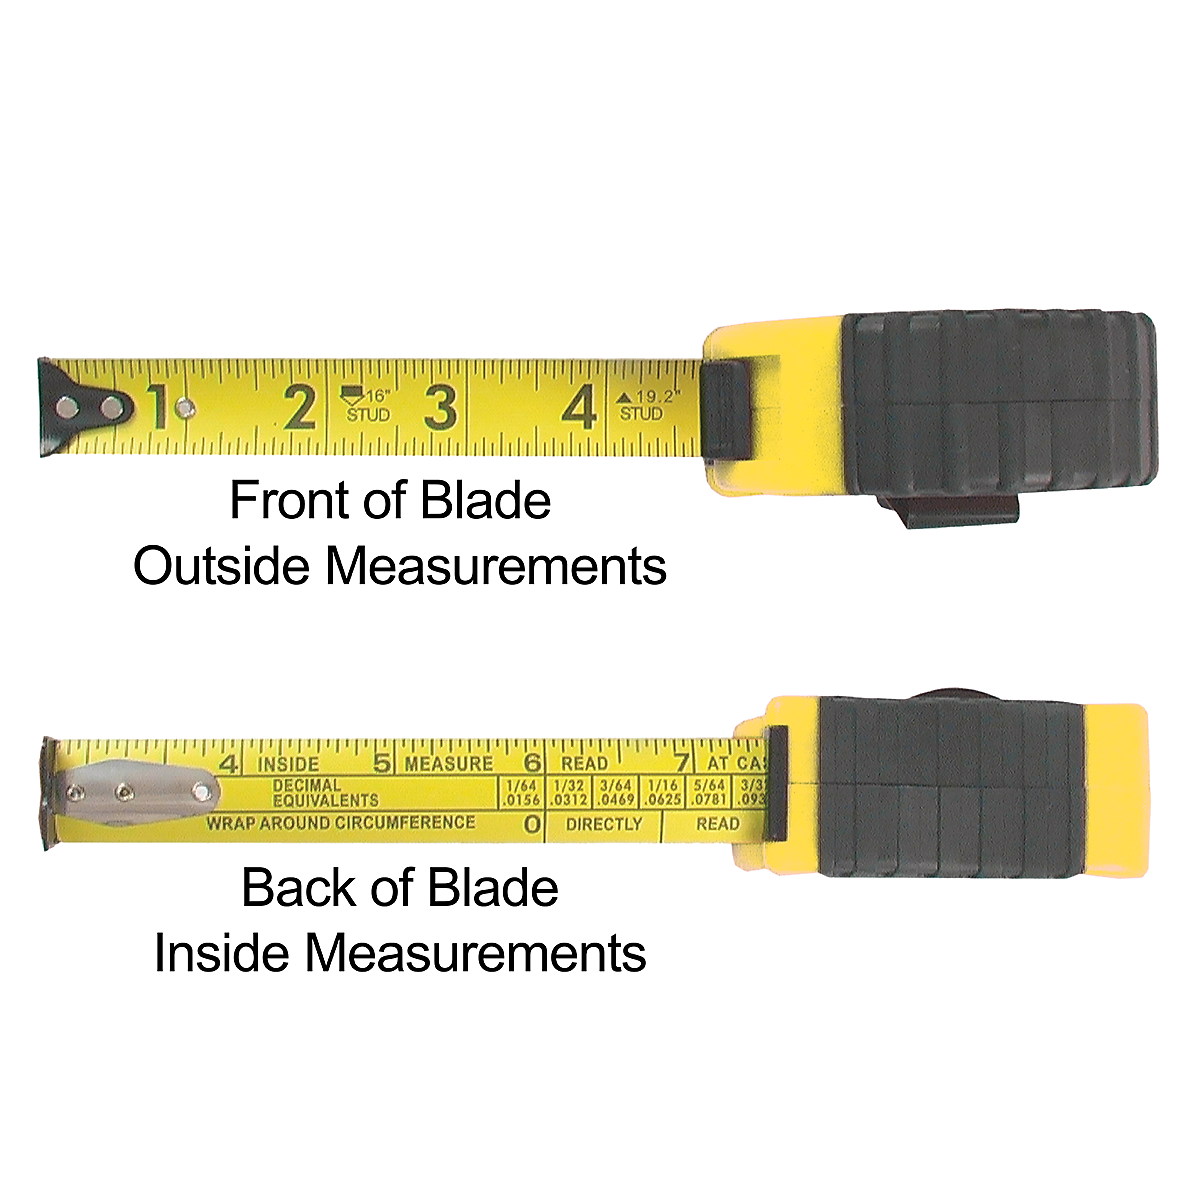 https://rowleycompany.scene7.com/is/image/rowleycompany/rowley-12ft-long-tape-measure-detail-dt12?$s7Product$&fmt=png